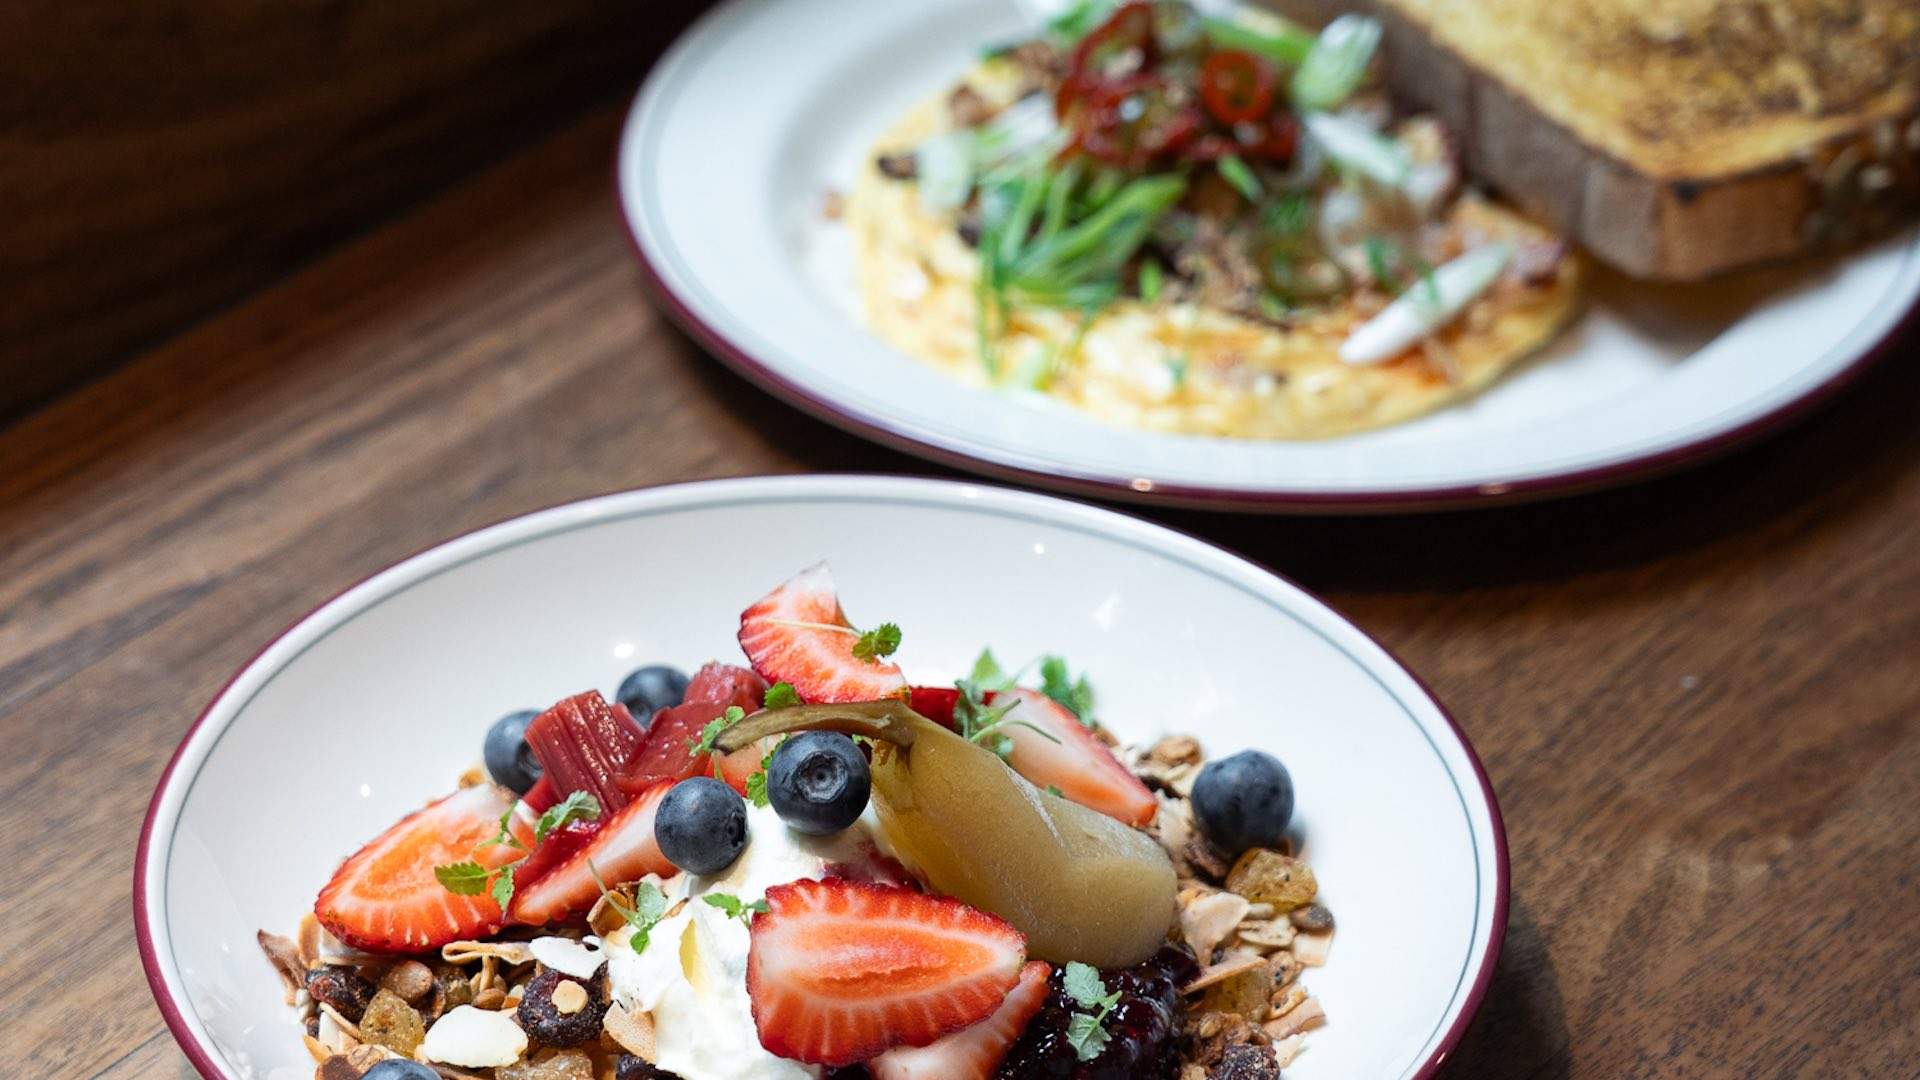 We're Giving Away a $400 Voucher to Spend on a Dining Experience at Queen & Collins